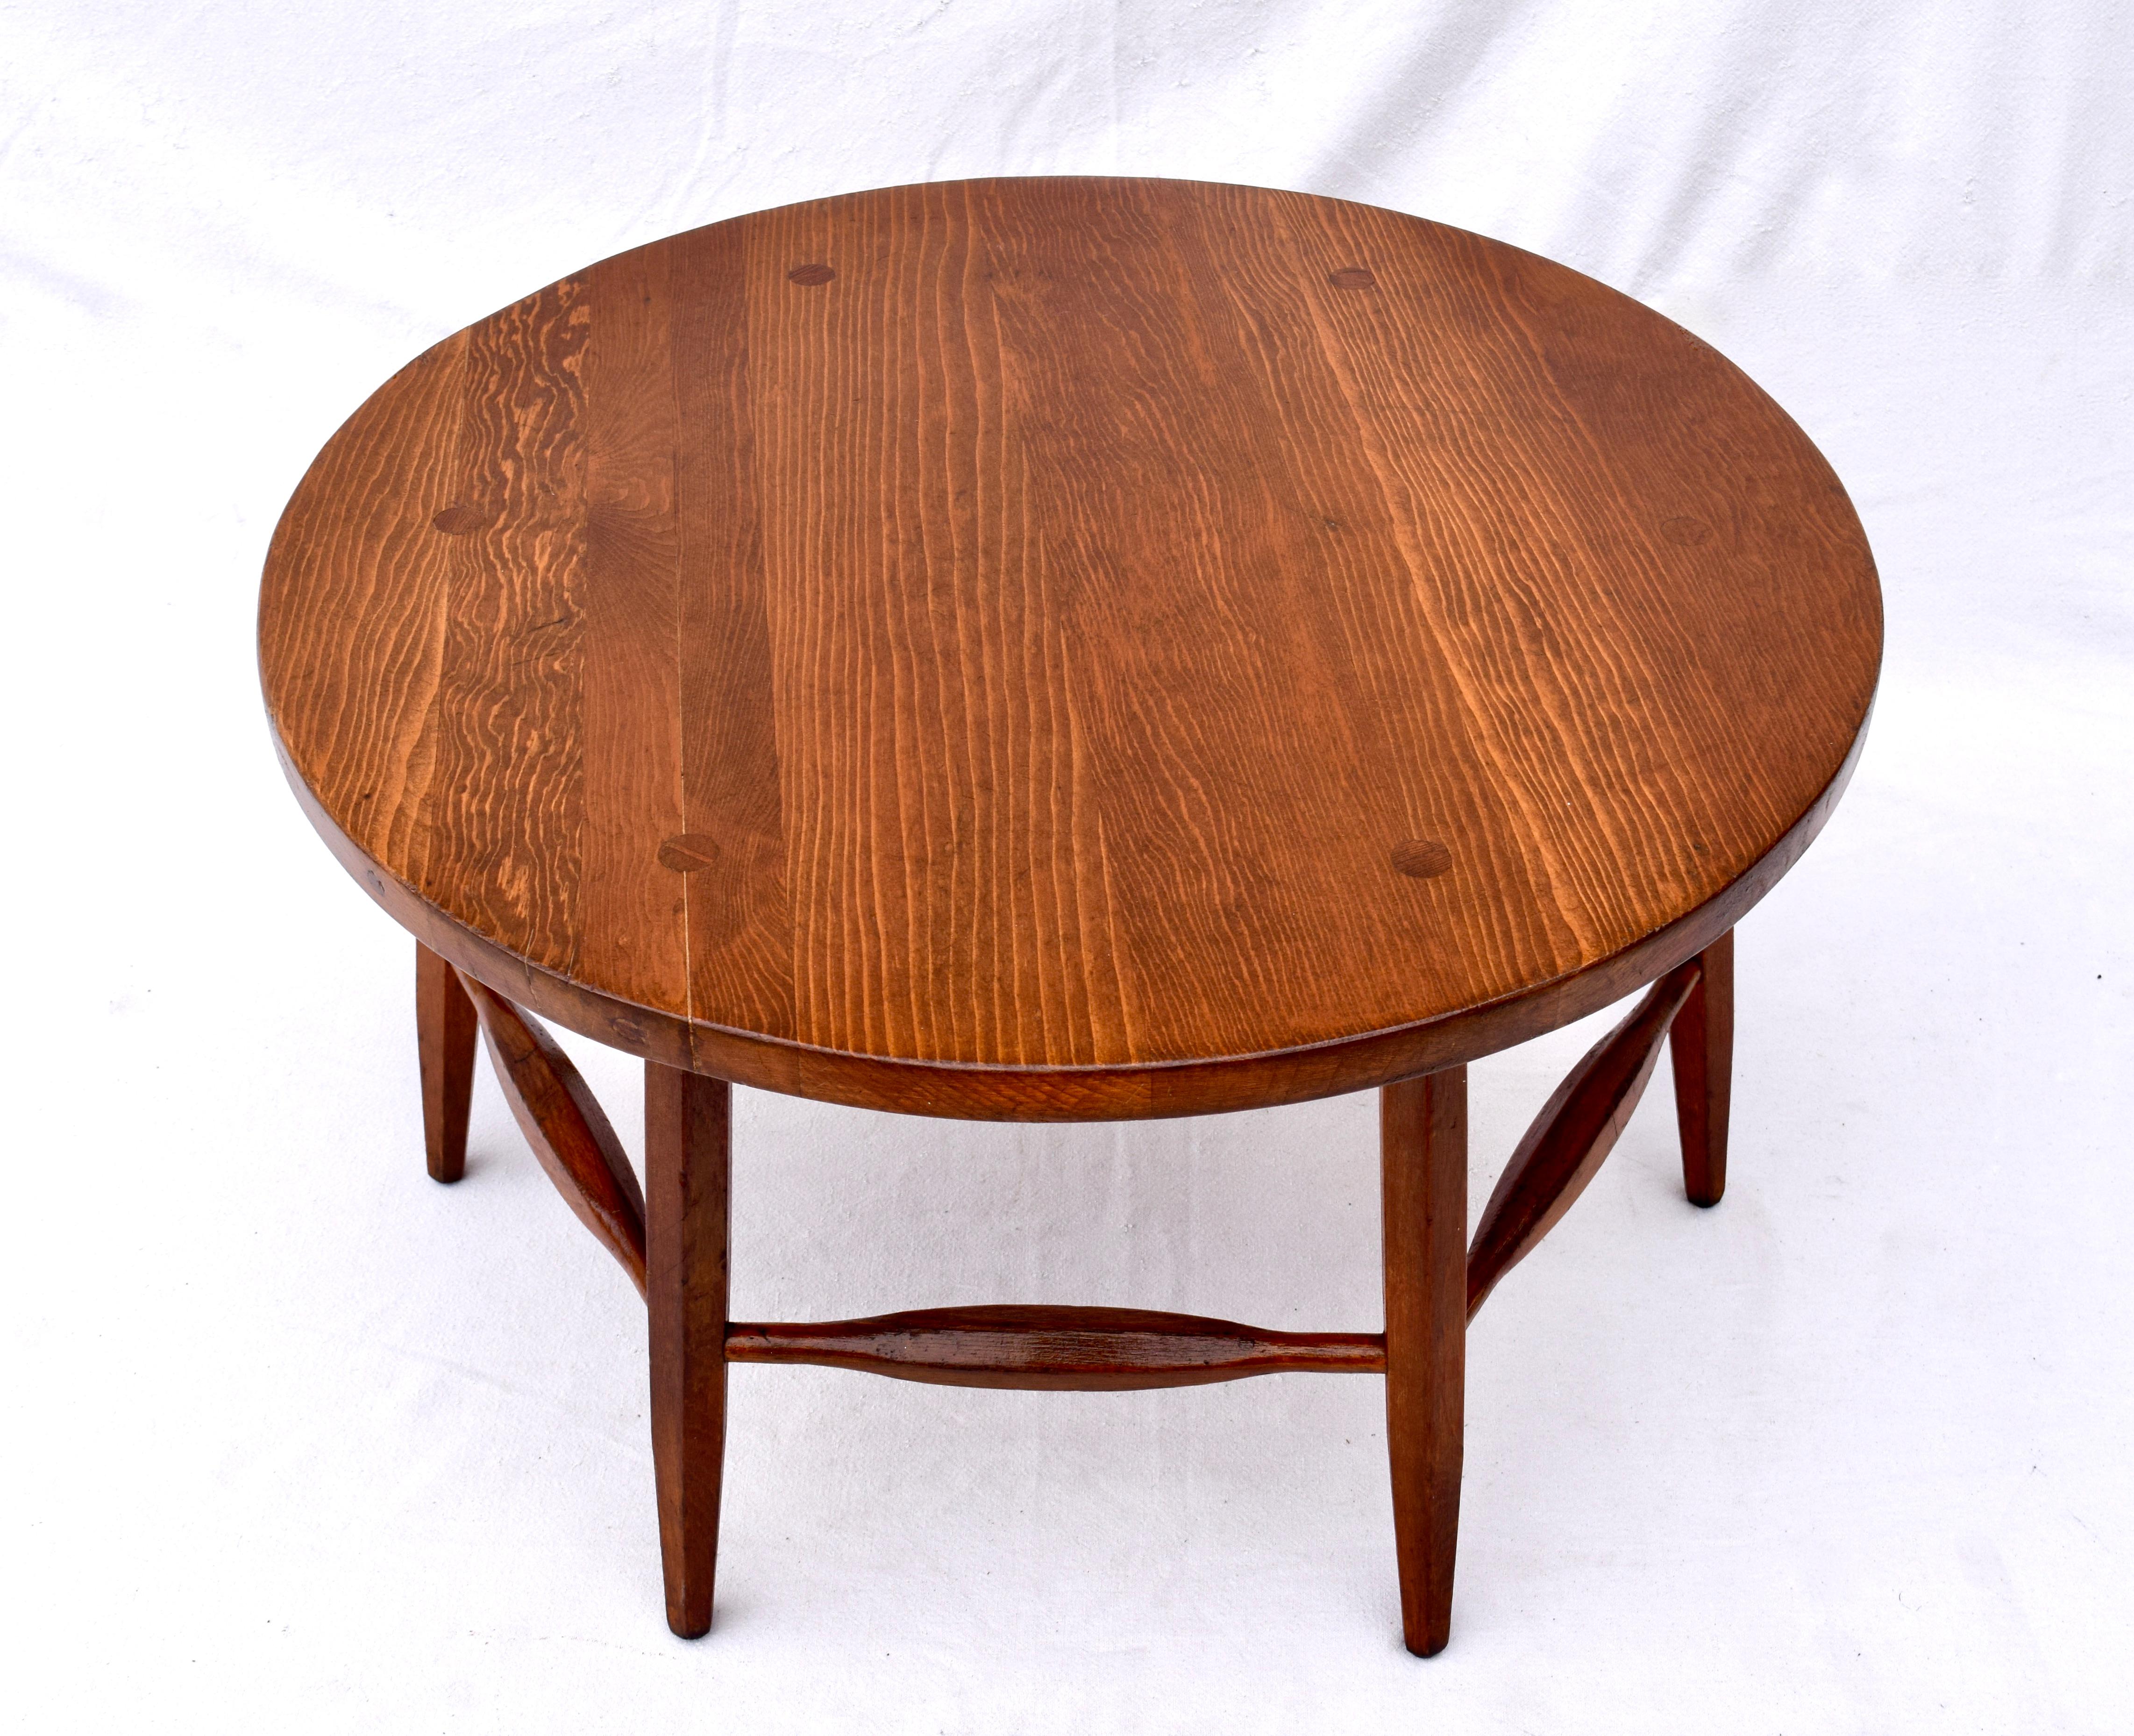 Rare round Monterey California red Adler coffee table with through mortise and Tenon chamfered legs and stretchers. Branded MONTEREY under the top. Classic American Northwest Mission style. Highly collectable of limited production from the early